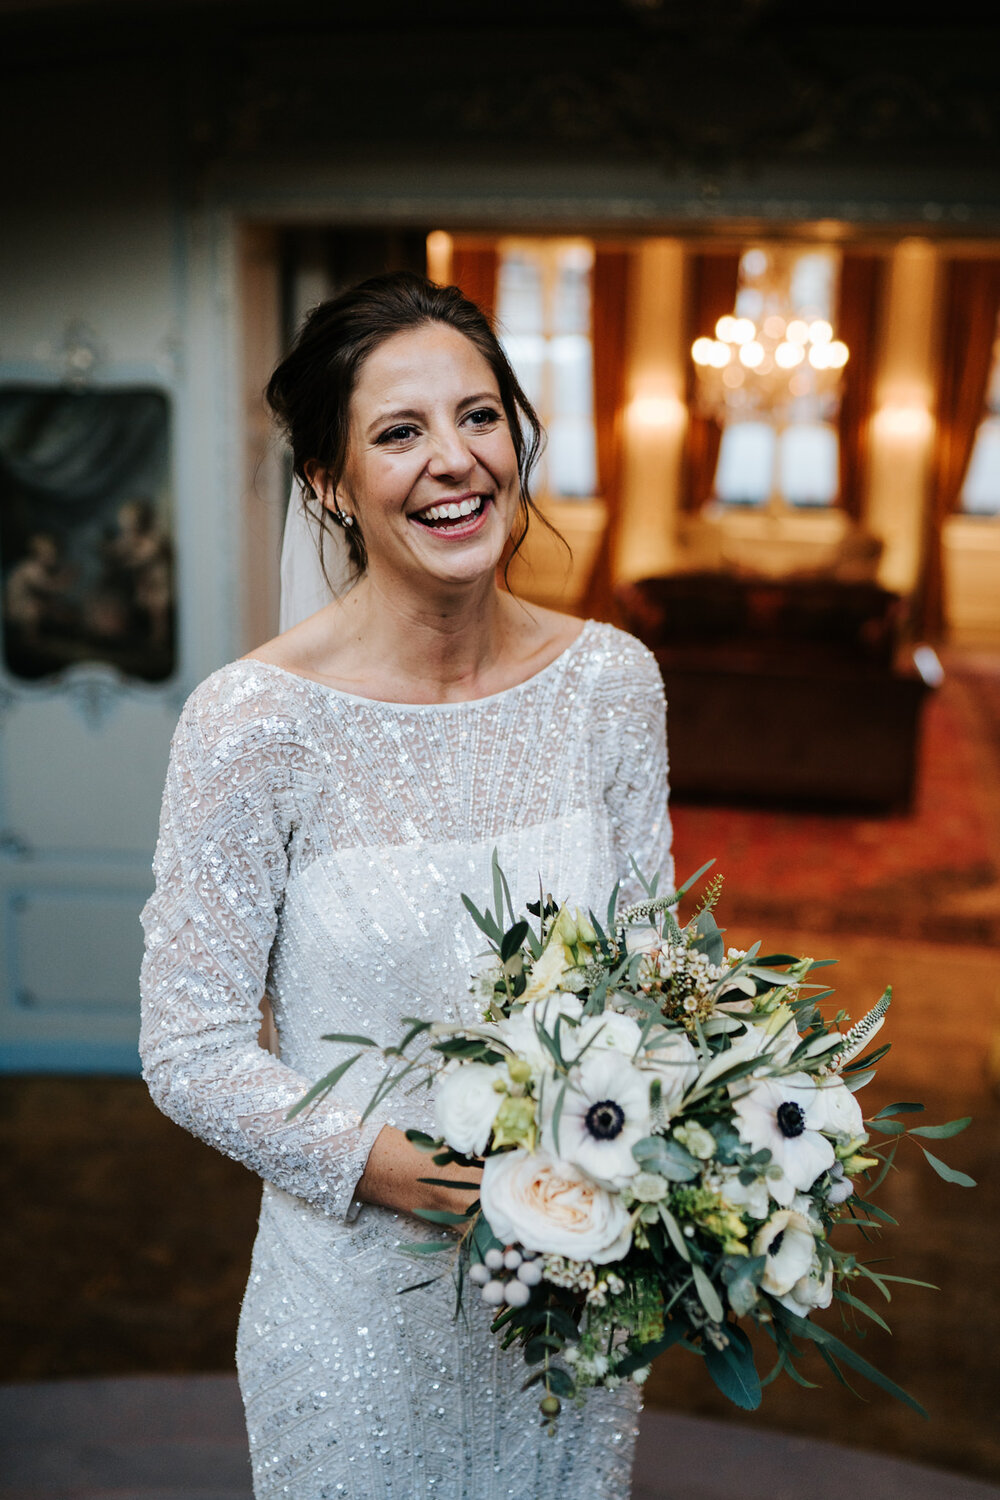 Portrait of the bride on the stairs at Savile Club London as groom, off-frame, makes her smile